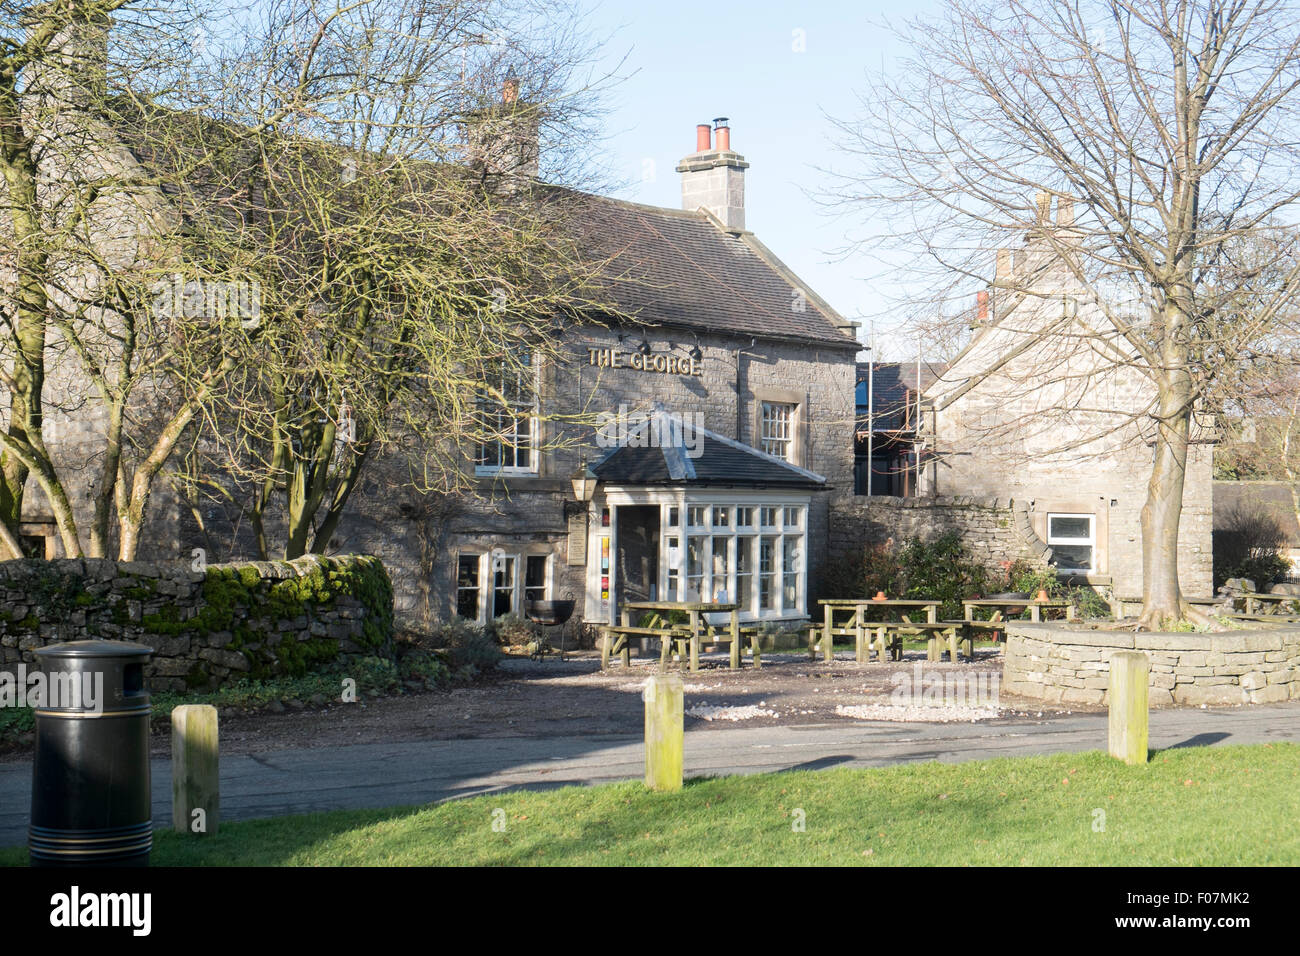 The George pub in the village of Alstonefield,Derbyshire,England Stock Photo